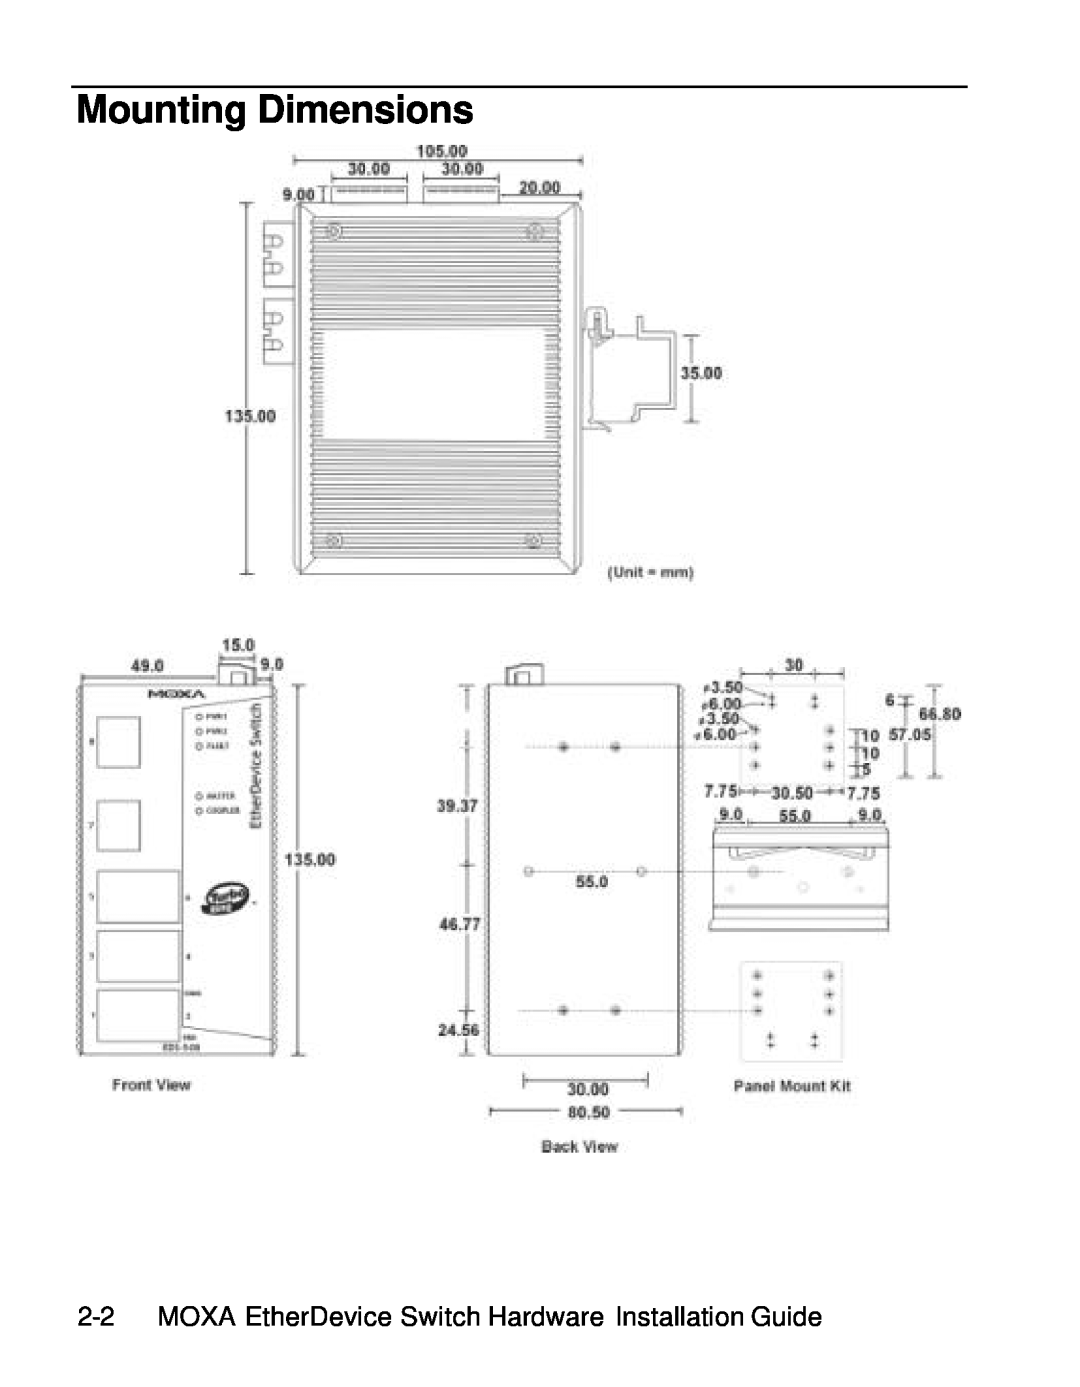 Moxa Technologies EDS-508 manual Mounting Dimensions, MOXA EtherDevice Switch Hardware Installation Guide 